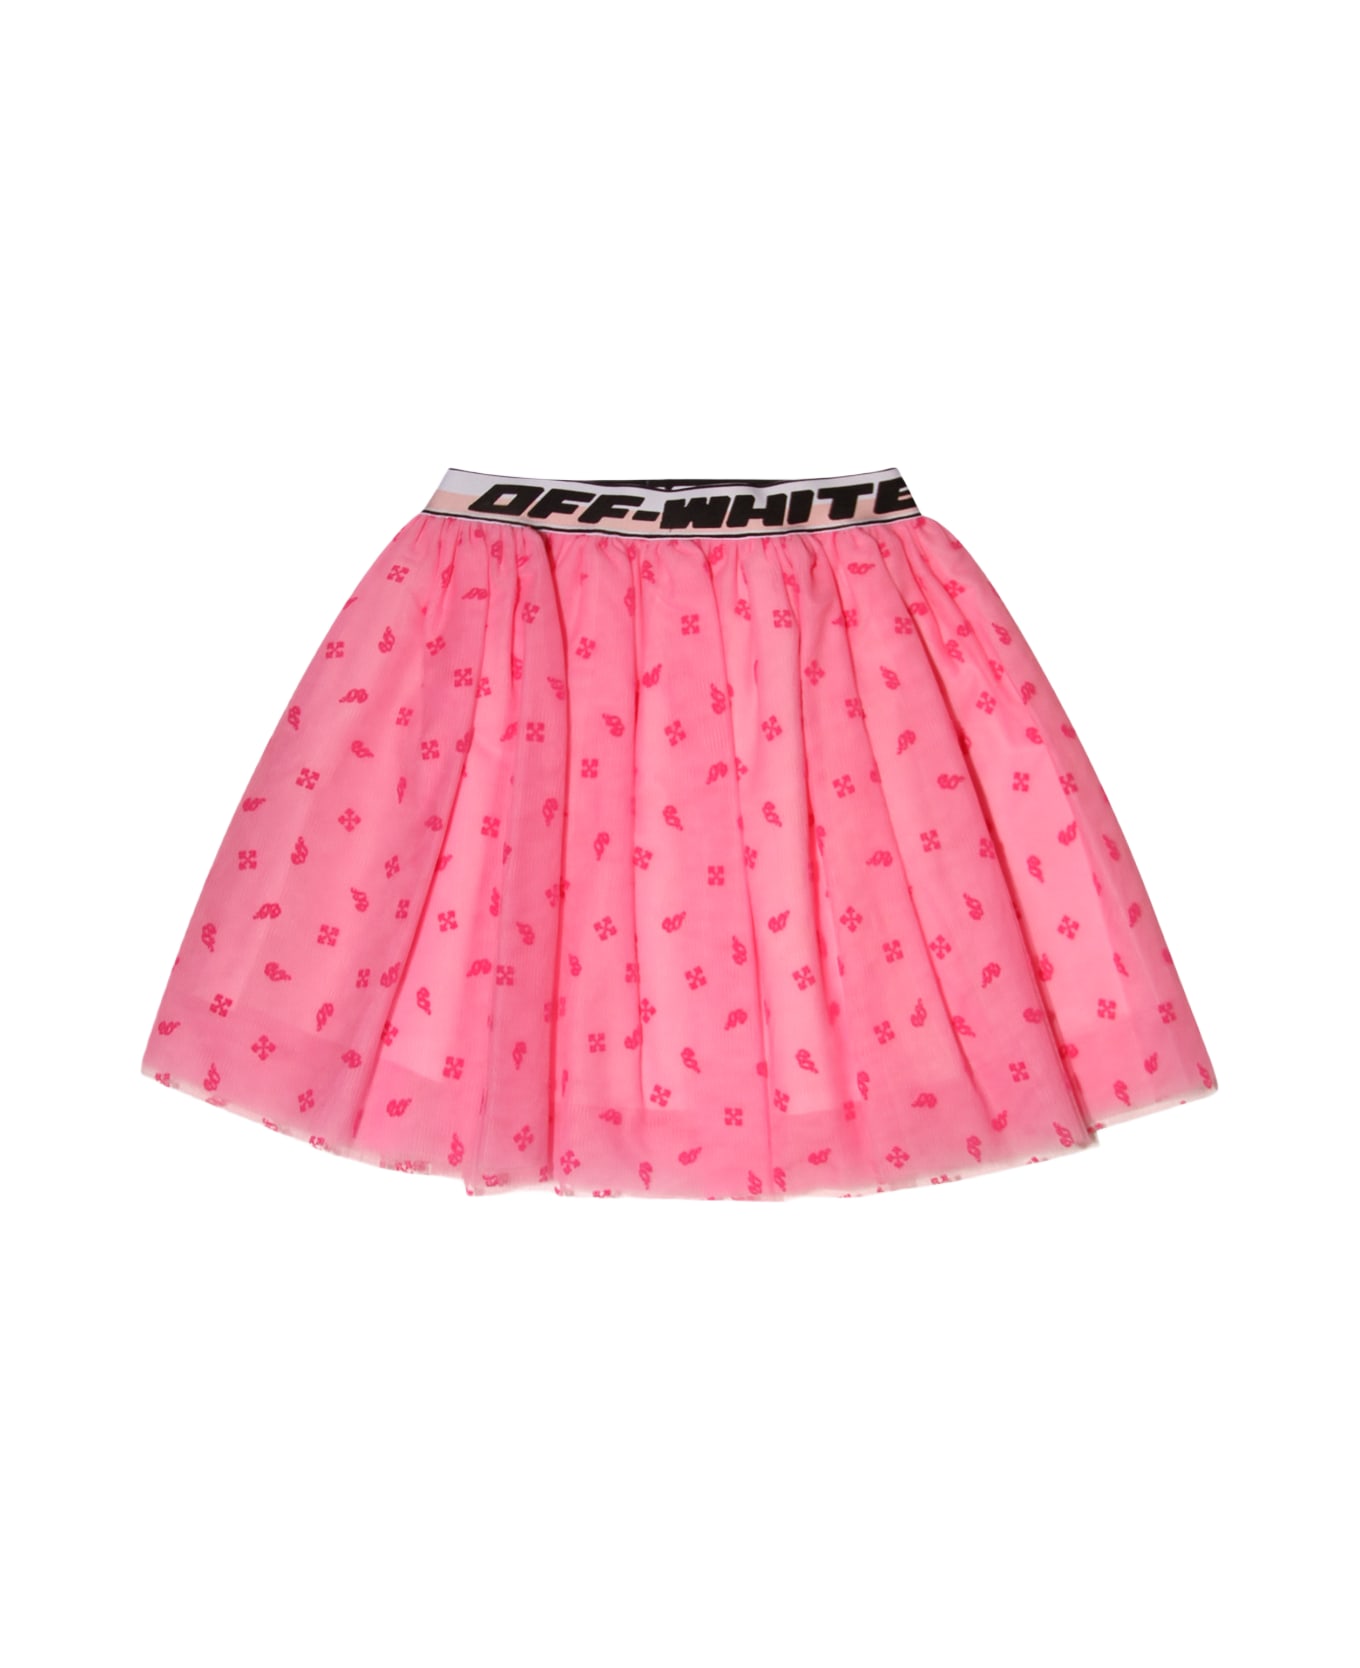 Off-White Pink And Black Tulle Skirt - PINK/BLACK